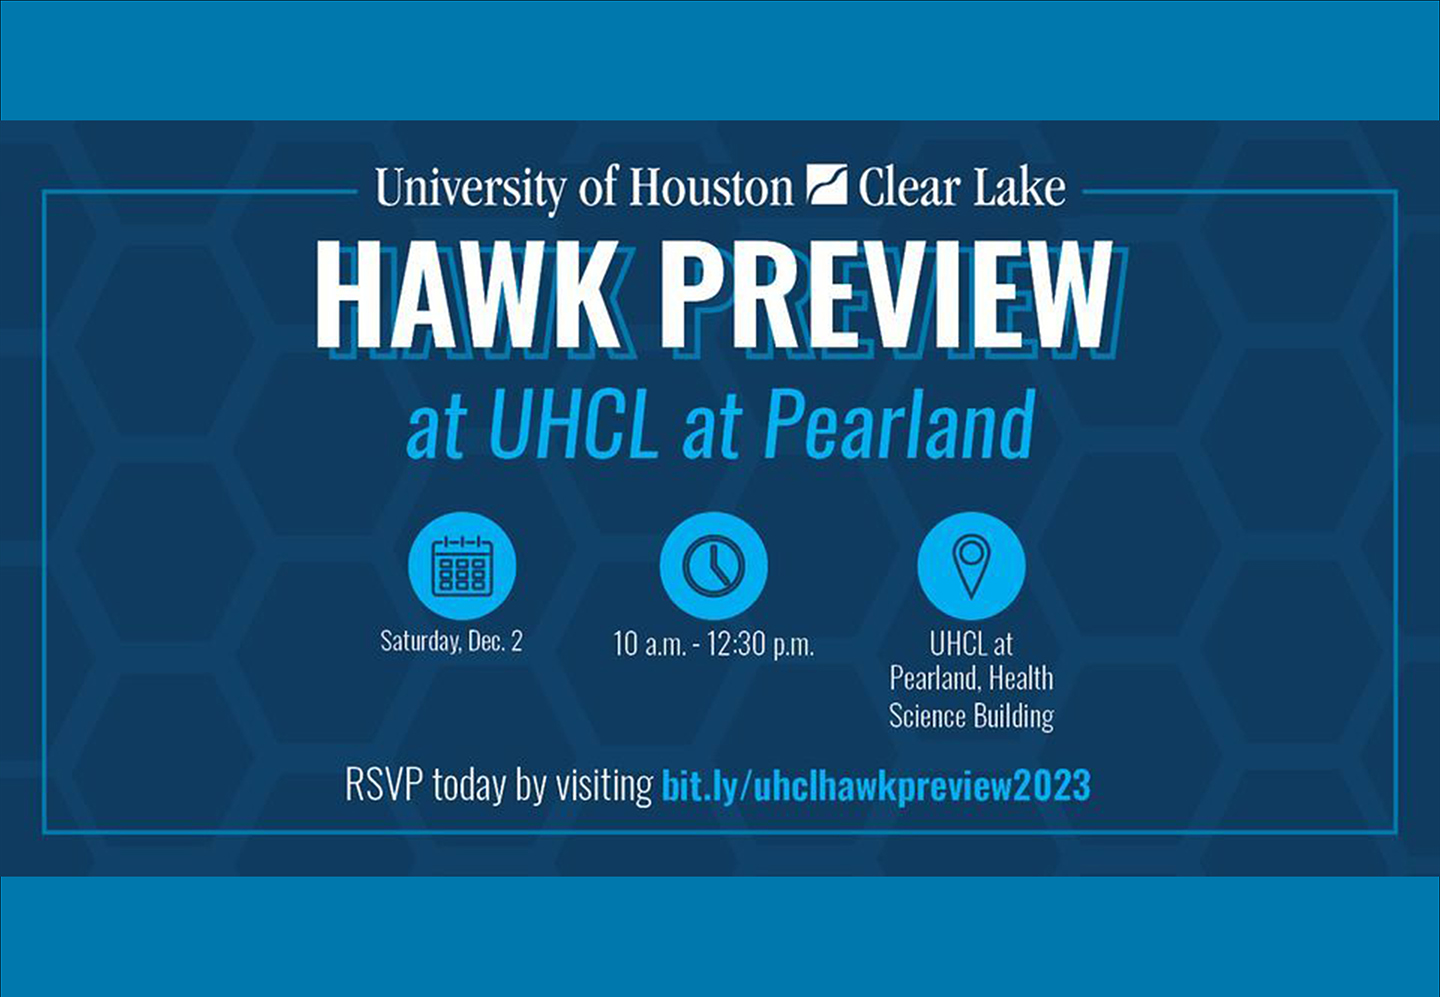 Hawk Preview at UHCL Pearland